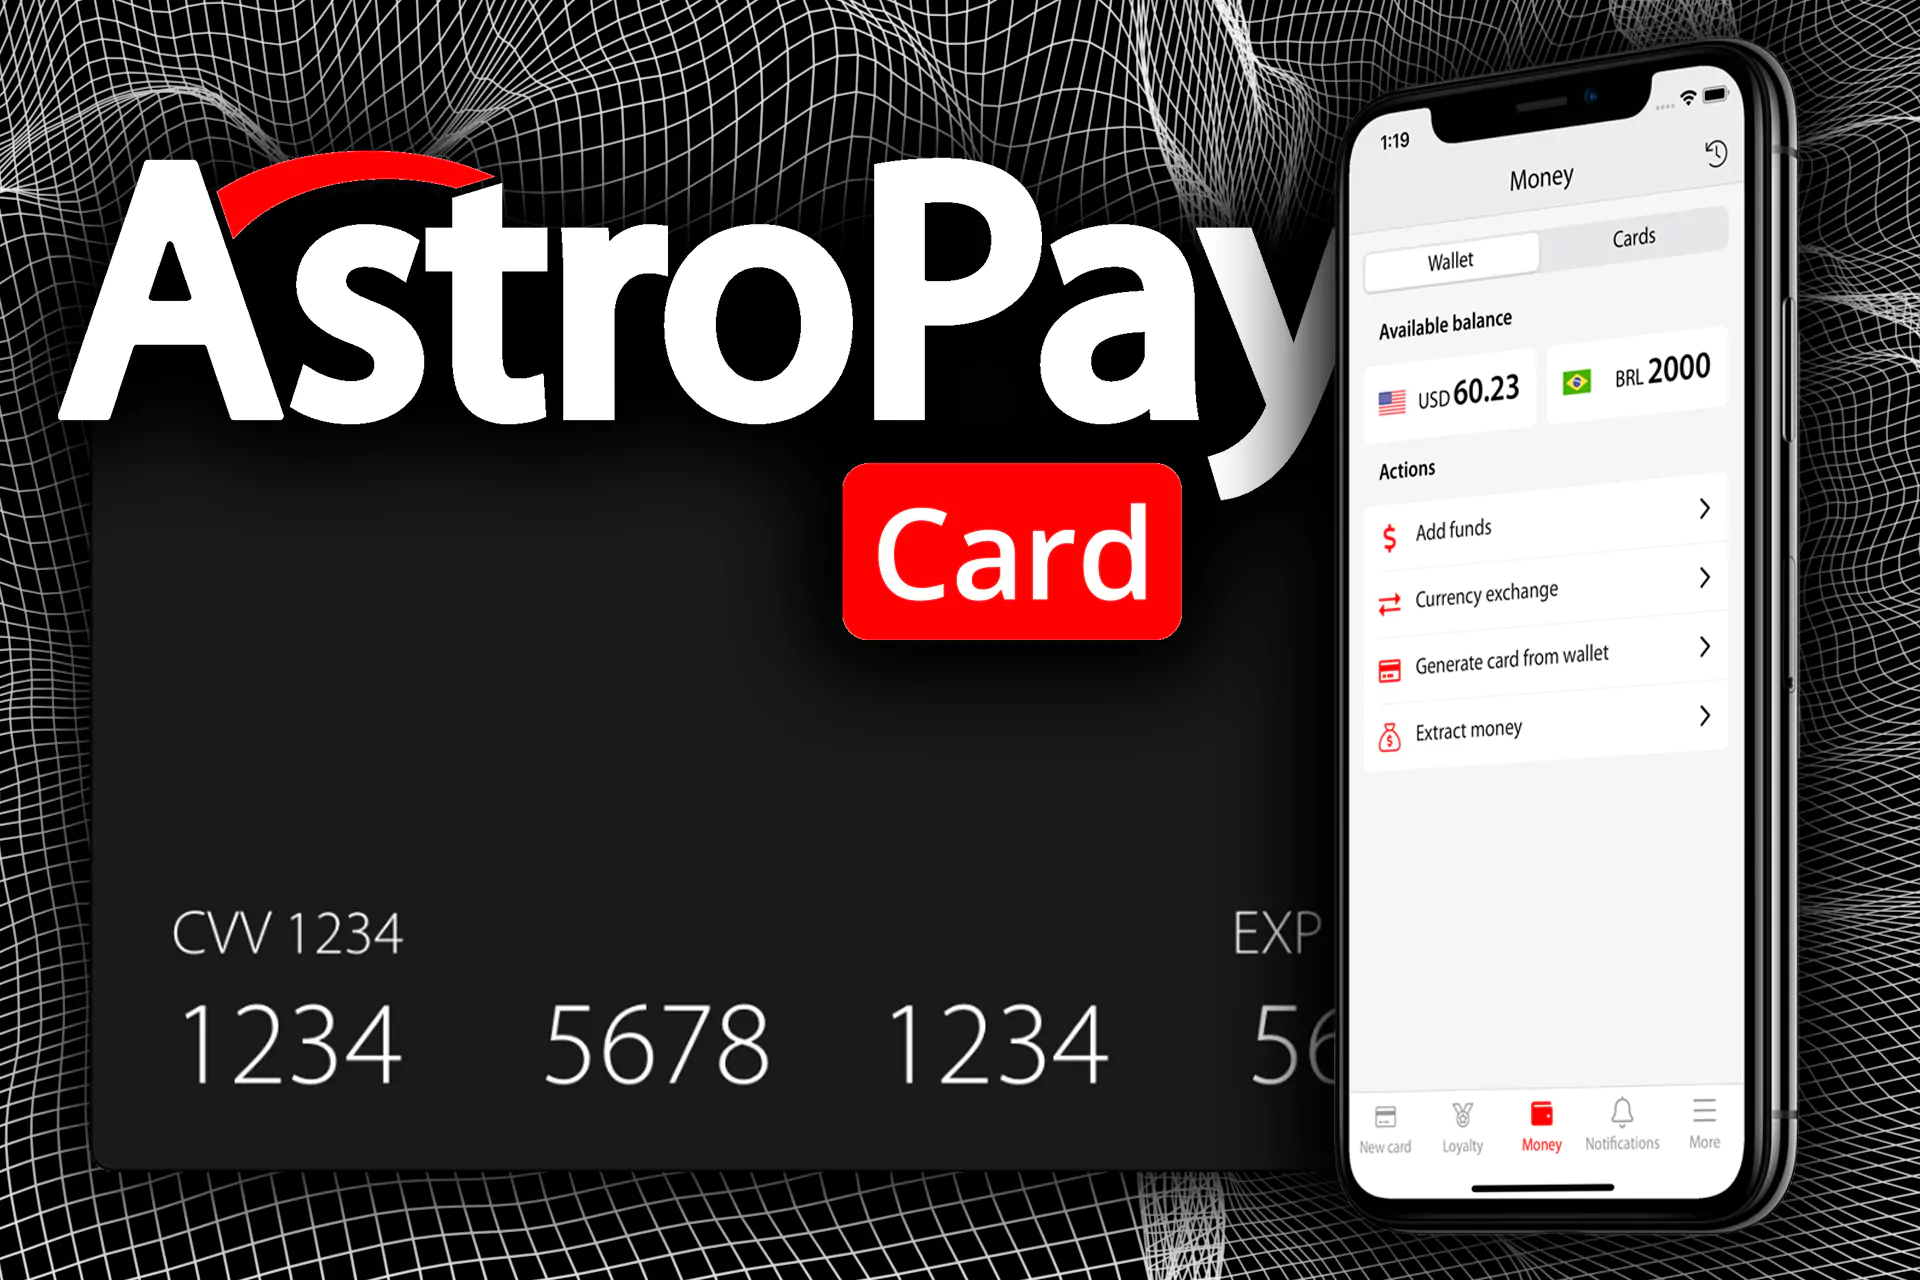 Download the Astropay mobile app for easy financial operations.